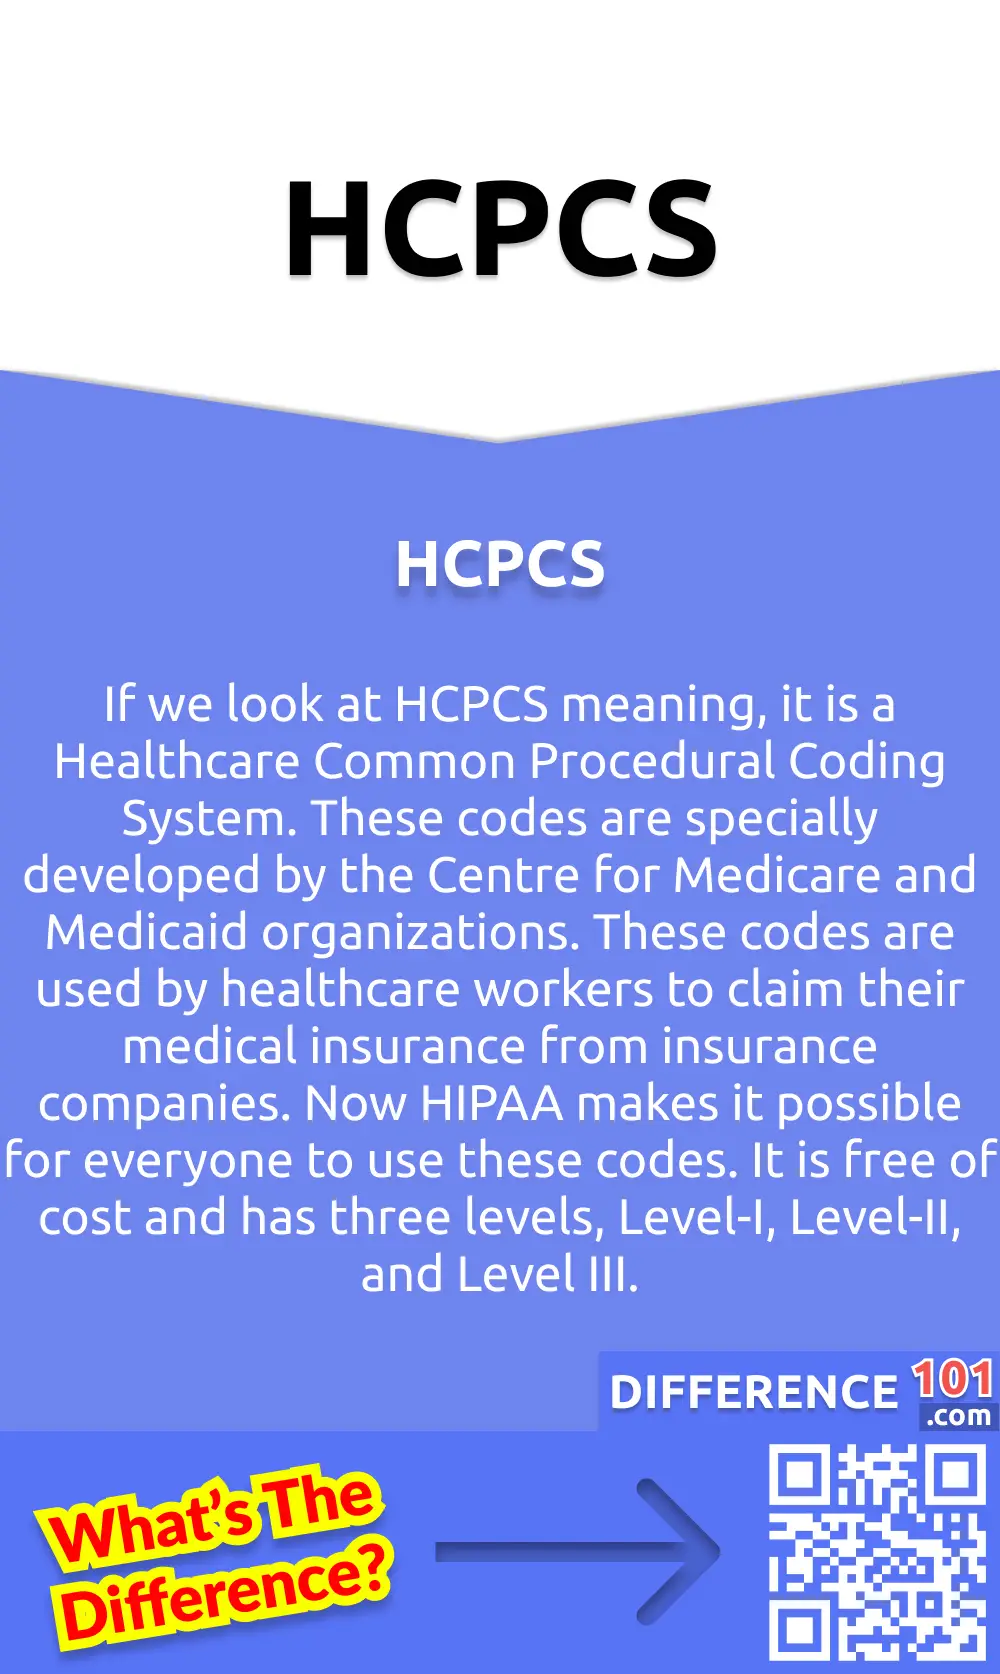 What Is HCPCS? If we look at HCPCS meaning, it is a Healthcare Common Procedural Coding System. These codes are specially developed by the Centre for Medicare and Medicaid organizations. These codes are used by healthcare workers to claim their medical insurance from insurance companies. Now HIPAA makes it possible for everyone to use these codes. It is free of cost and has three levels, Level-I, Level-II, and Level III. Level-I consists of the CPT codes addressed by the American Medical Association. These CPT codes are mainly used by healthcare workers to offer certain services to patients. Level II consists of the codes which are related to the non-physical service providers. For example, the ambulance service. The last Level III is known as local codes. Which looks up the medical history of the patients and provides the description for healthcare insurance of some programs.